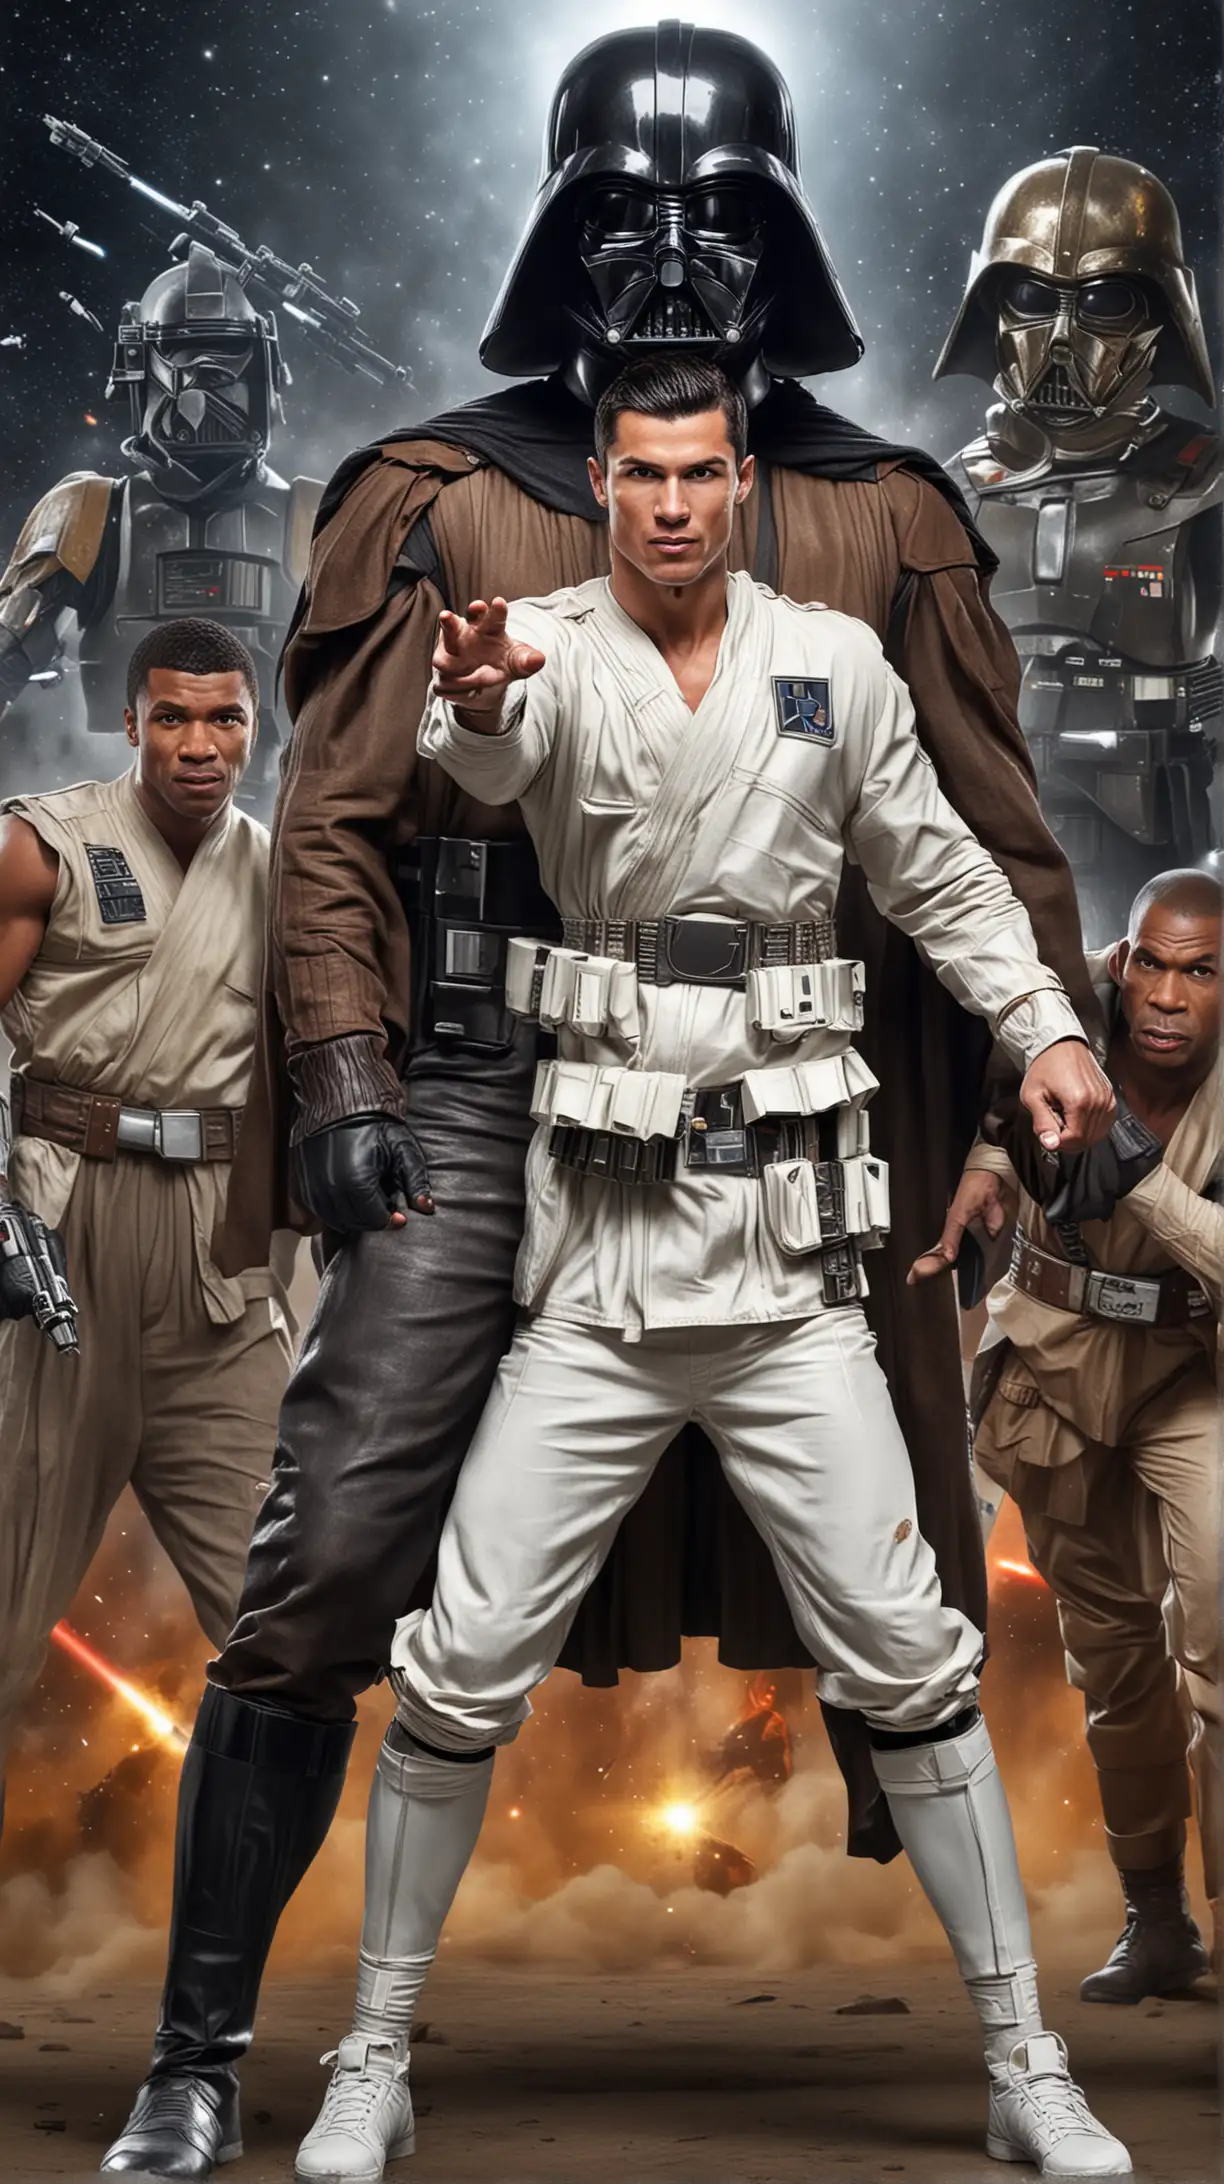 Cristiano Ronaldo as star wars character fights with Mike Tyson, star wars background 